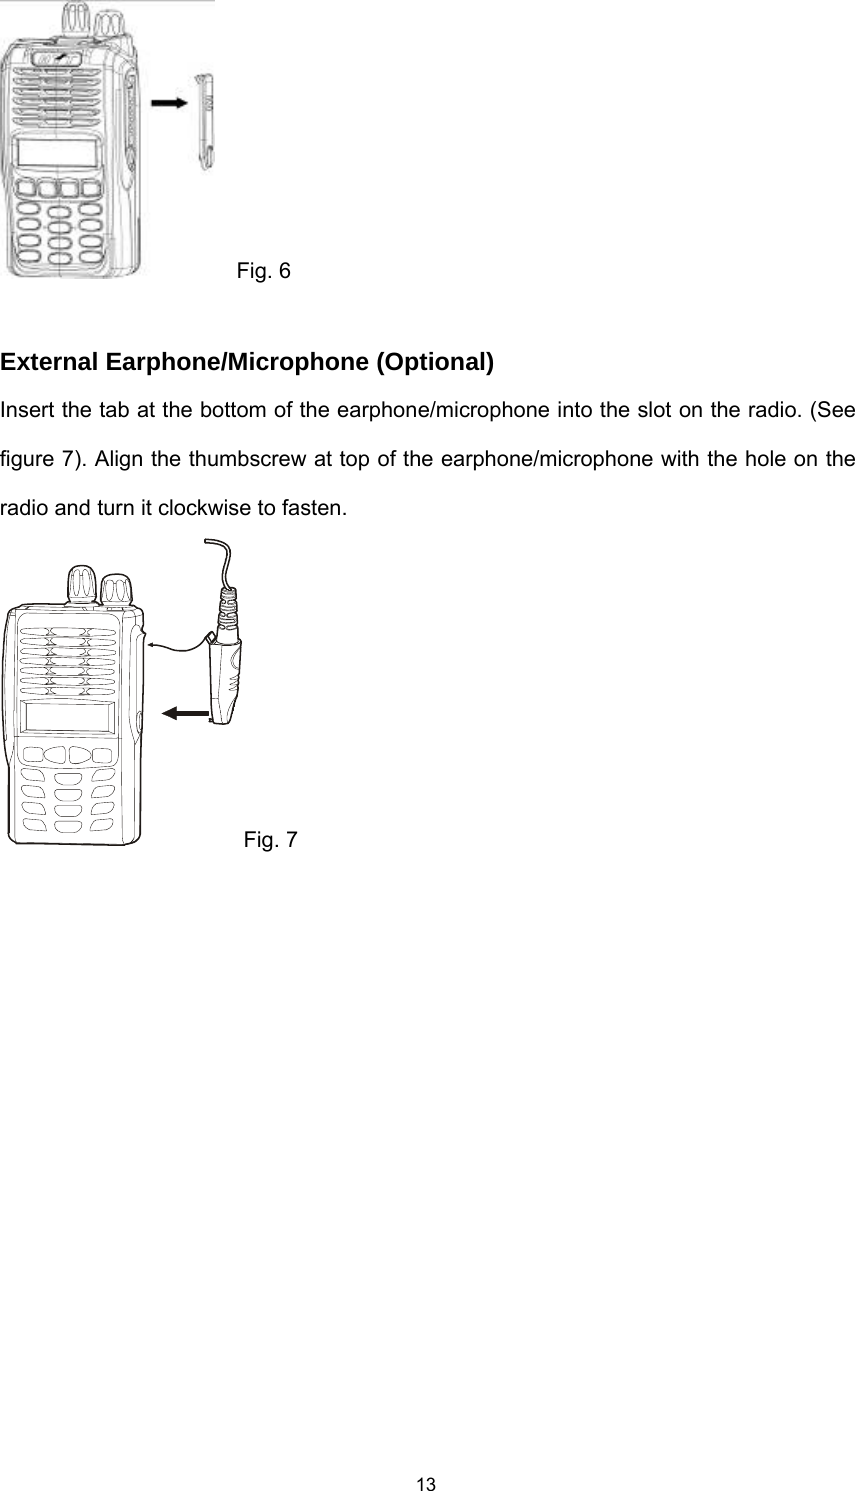  13  Fig. 6  External Earphone/Microphone (Optional) Insert the tab at the bottom of the earphone/microphone into the slot on the radio. (See figure 7). Align the thumbscrew at top of the earphone/microphone with the hole on the radio and turn it clockwise to fasten. Fig. 7  